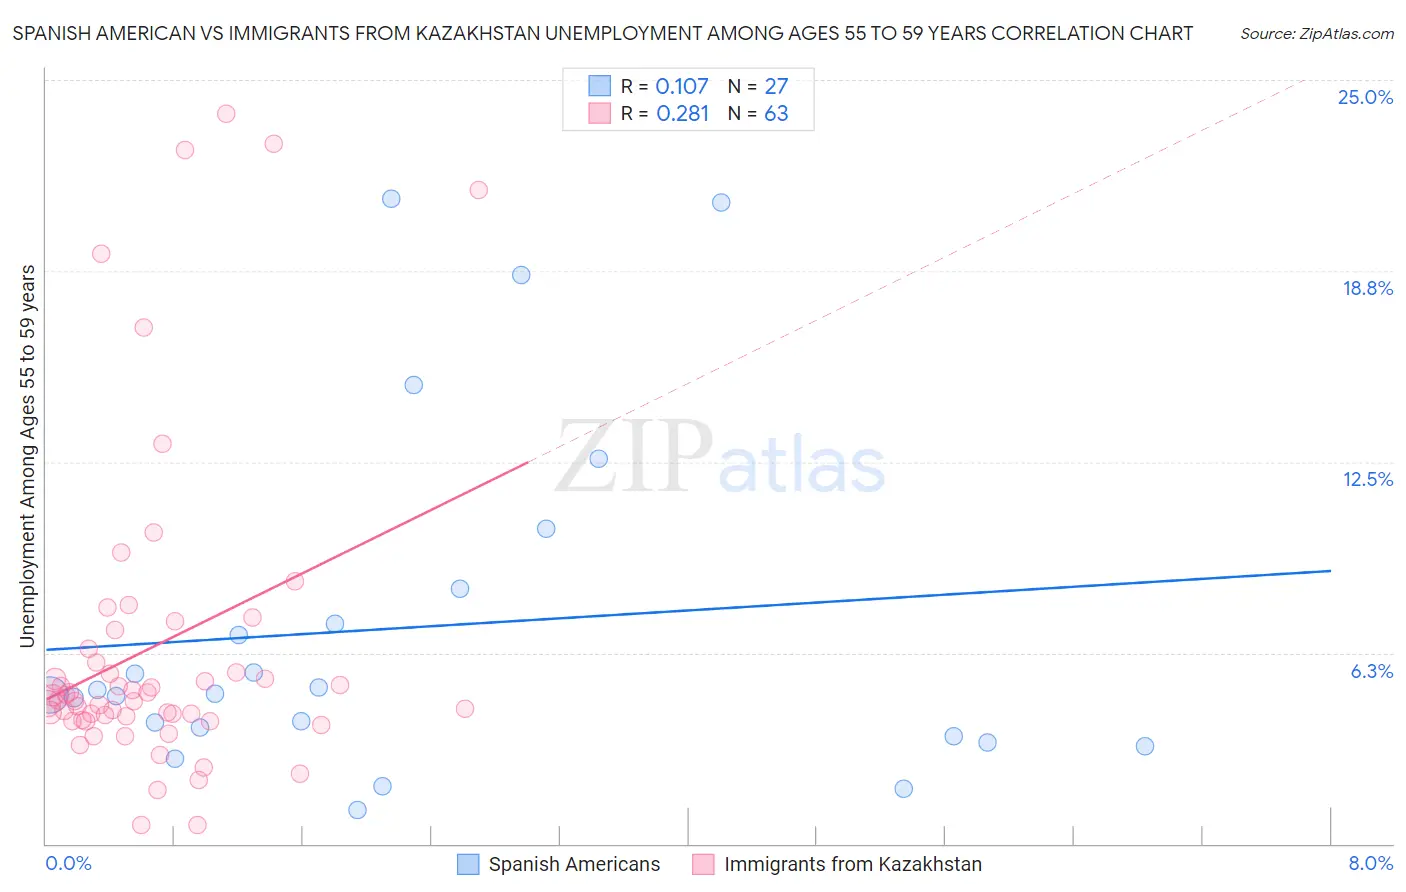 Spanish American vs Immigrants from Kazakhstan Unemployment Among Ages 55 to 59 years